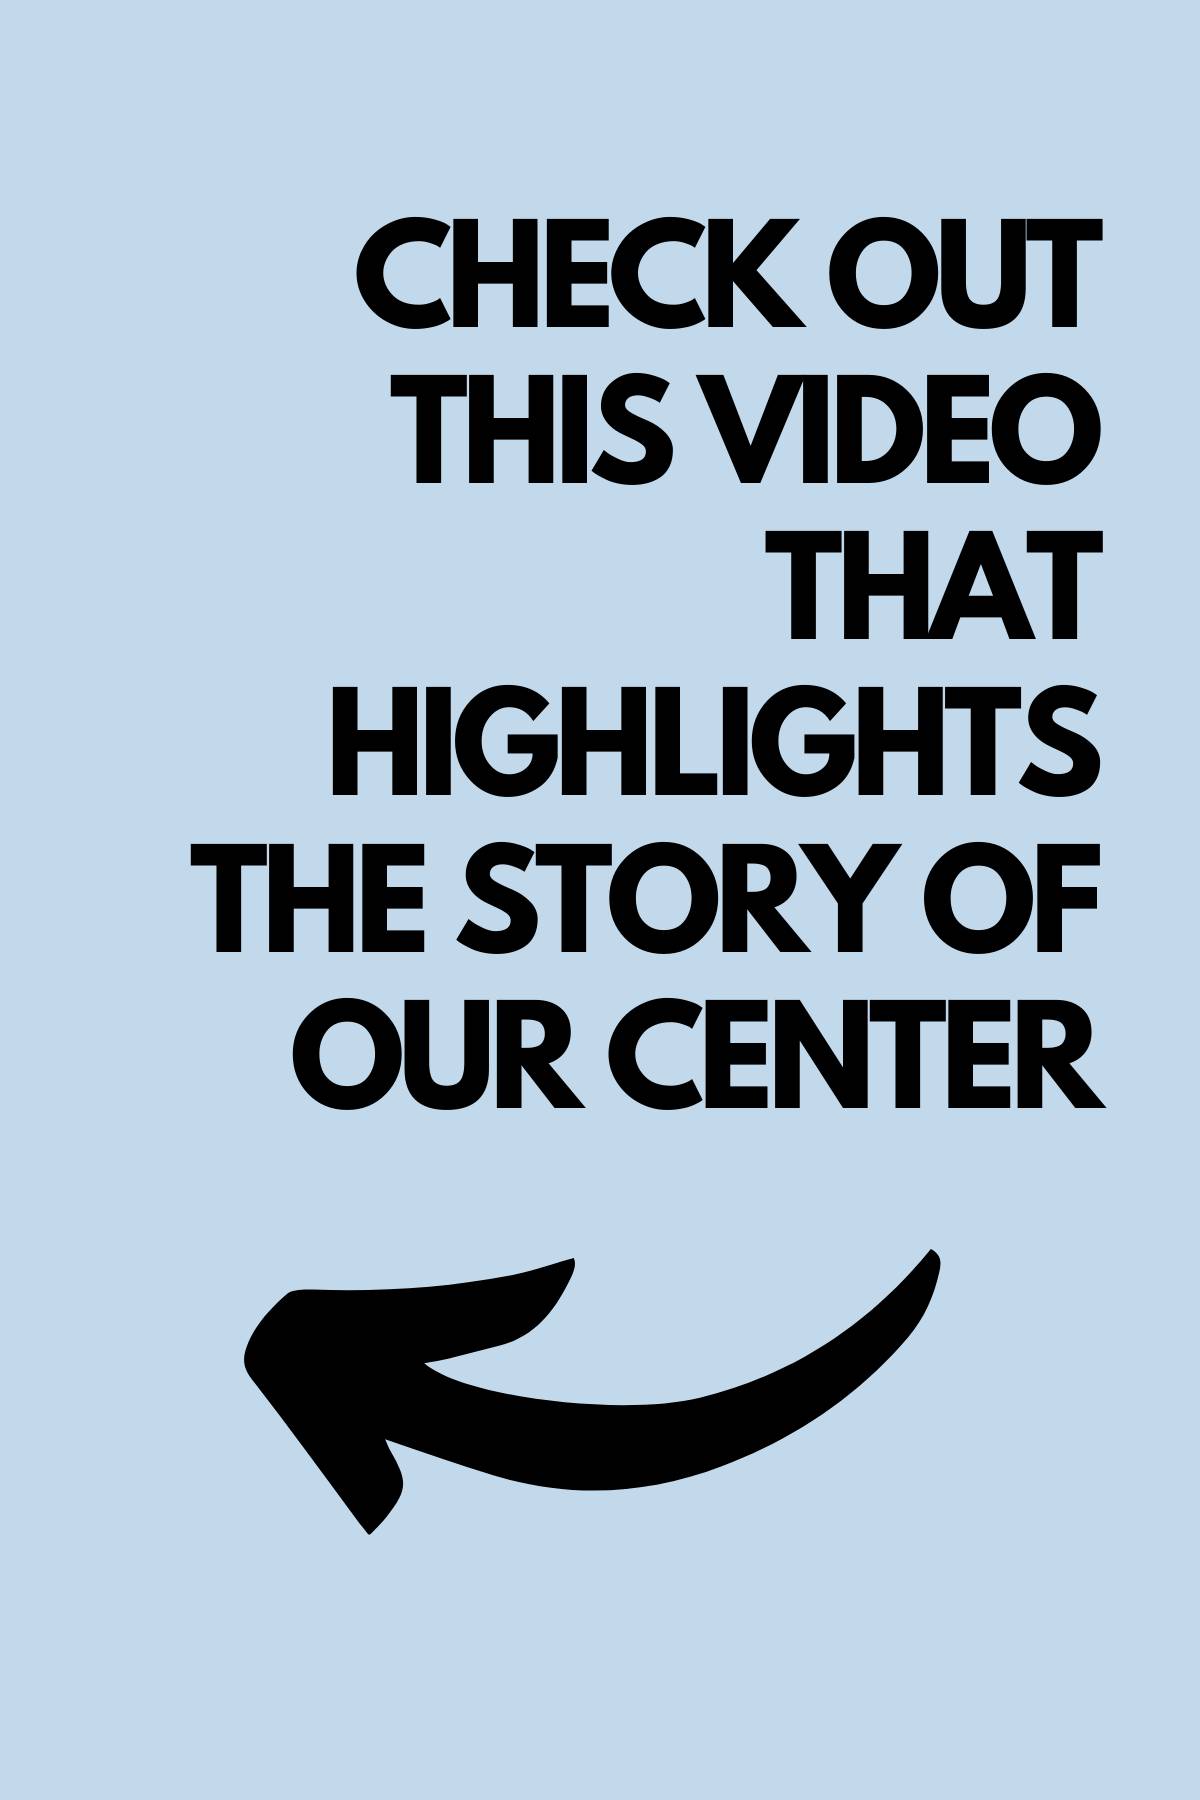 Check out this video that highlights the story of our center